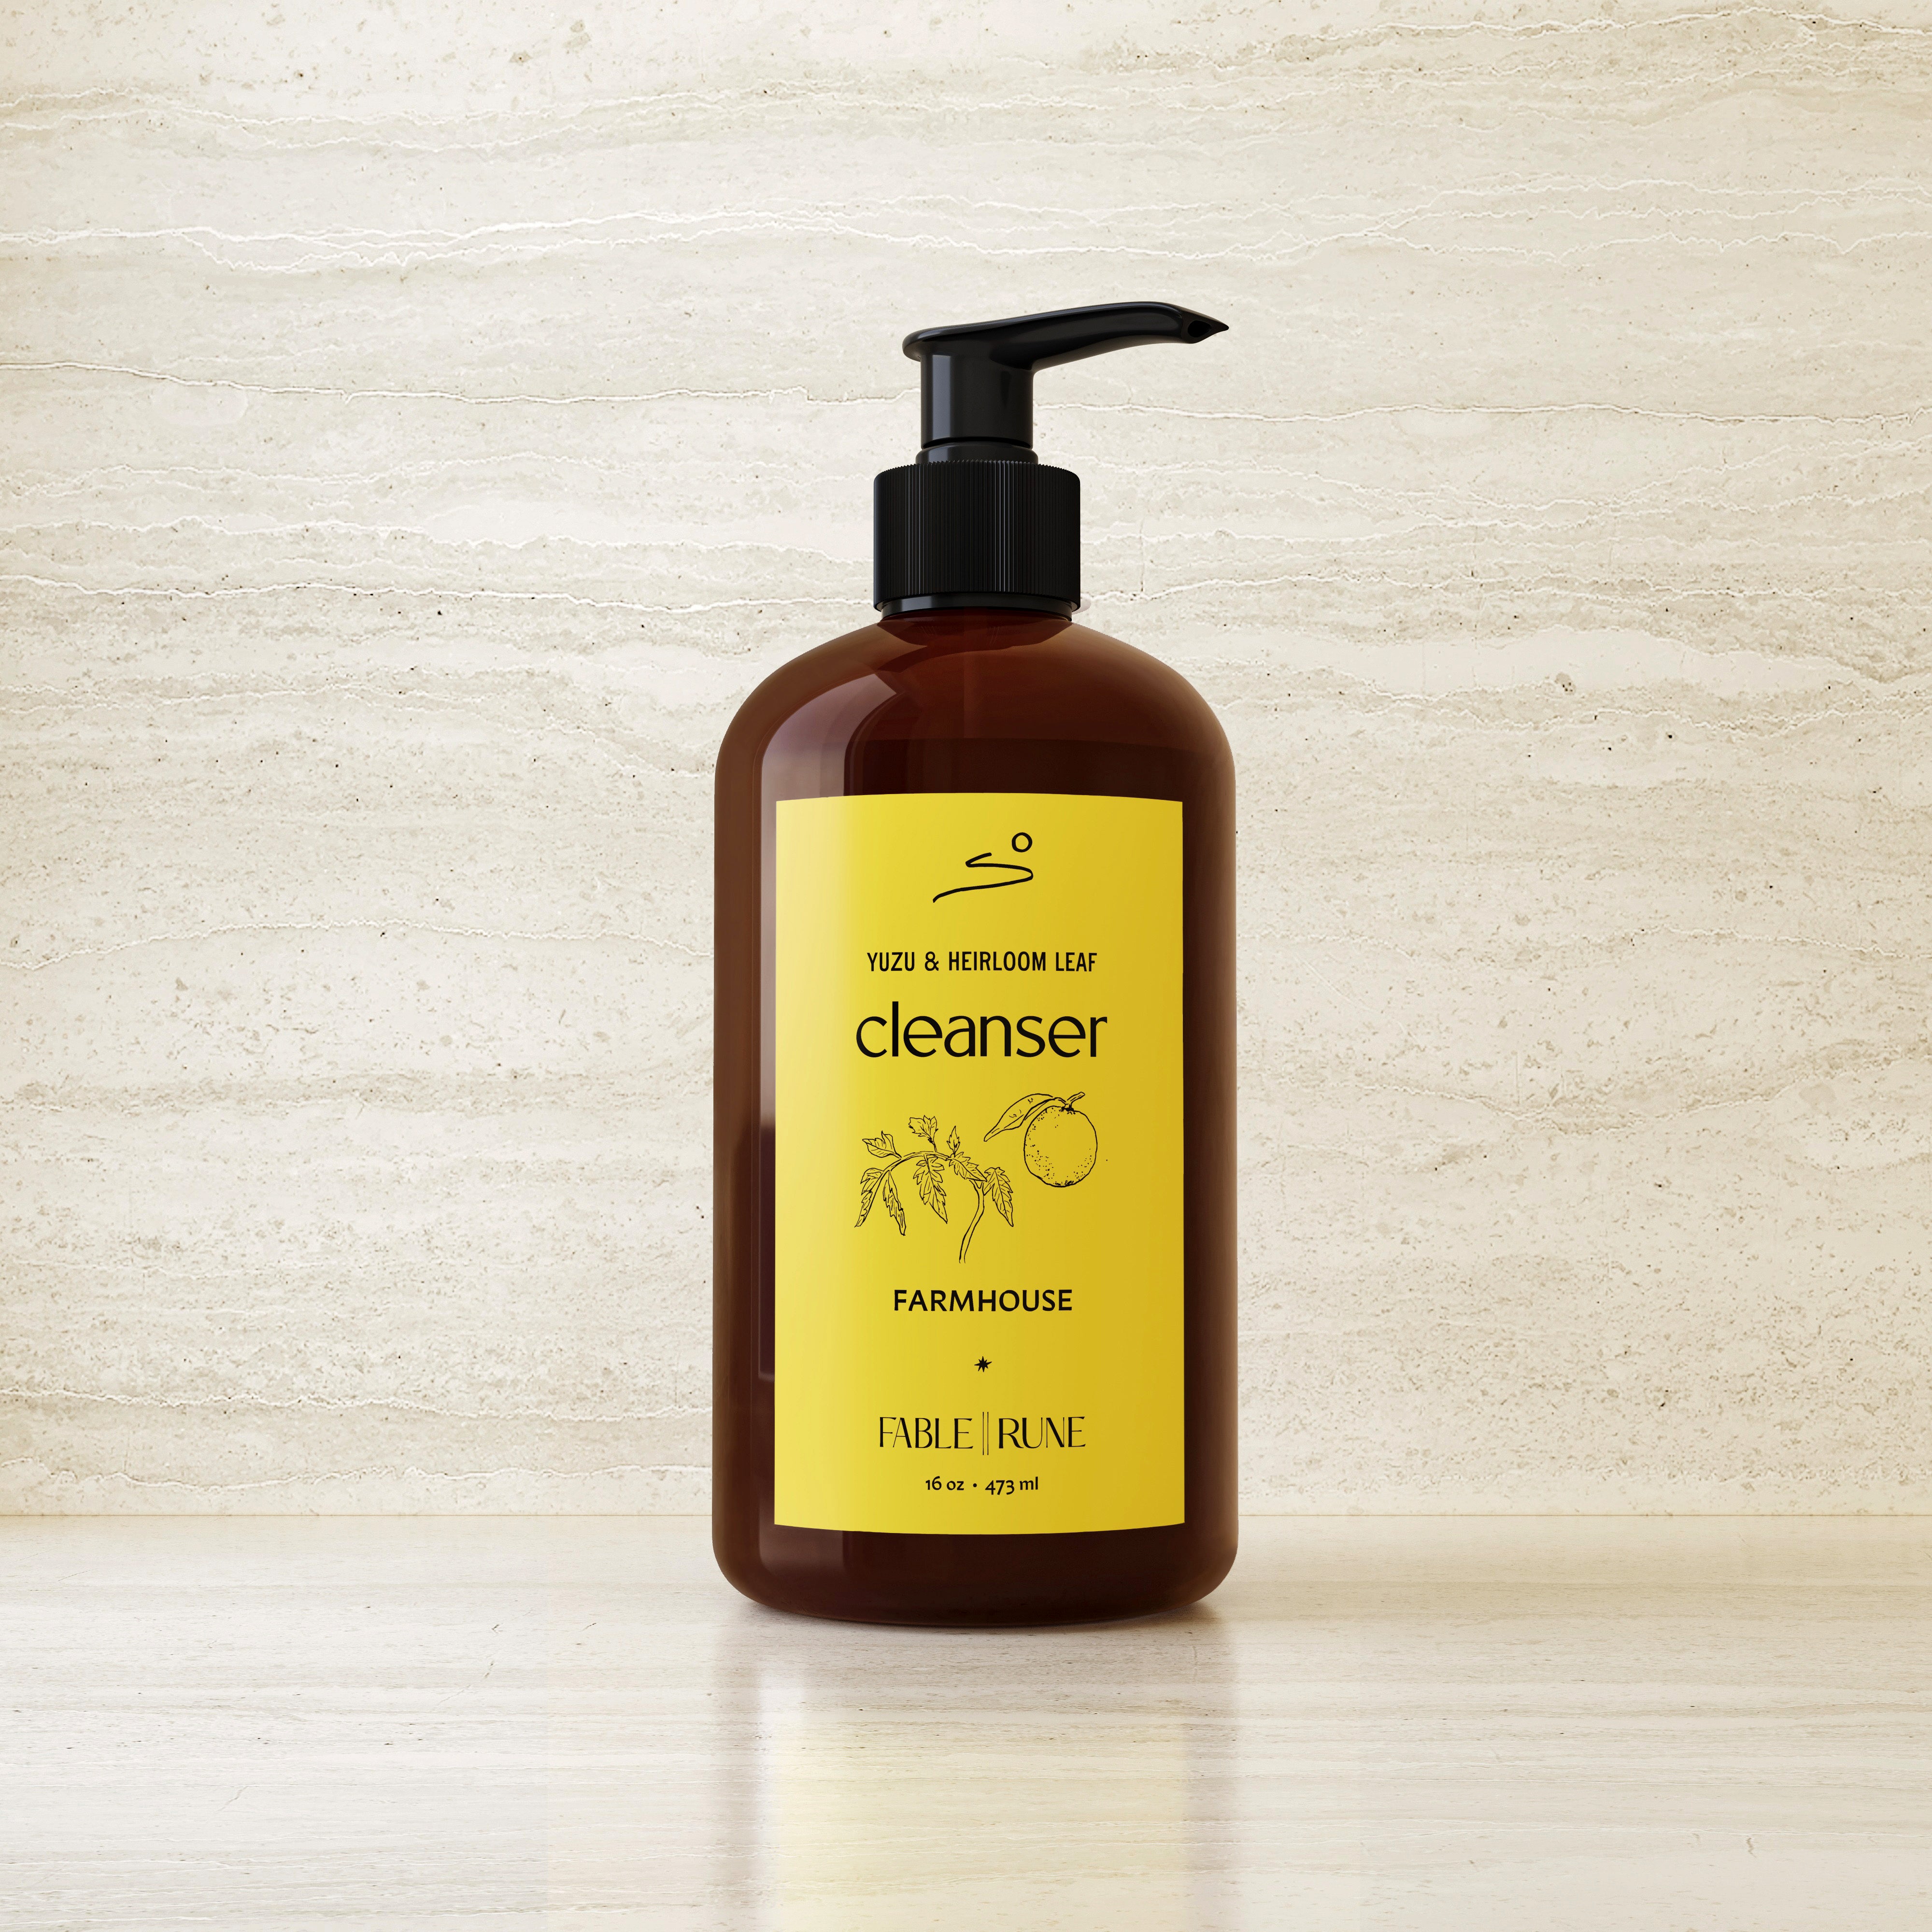 Yuzu &amp; Heirloom Leaf Cleanser Handcrafted Fable Rune for Farmhouse Paso Robles by Nomada Deco